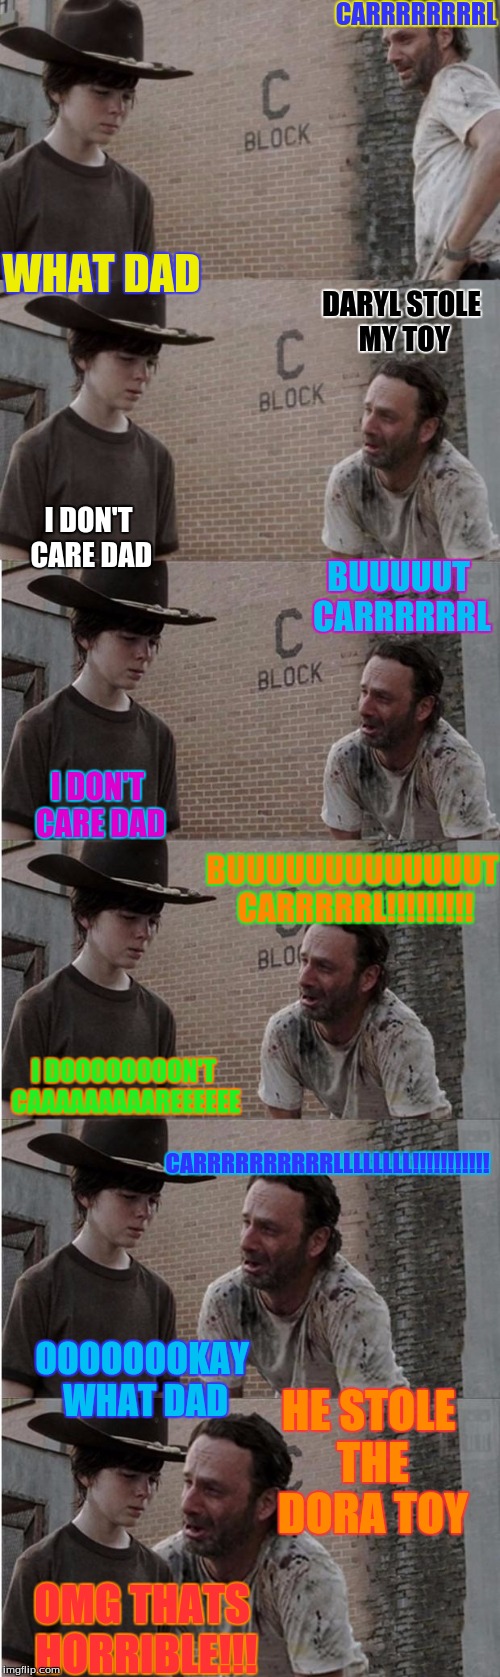 Rick and Carl Longer | CARRRRRRRRL; WHAT DAD; DARYL STOLE MY TOY; I DON'T CARE DAD; BUUUUUT CARRRRRRL; I DON'T CARE DAD; BUUUUUUUUUUUUUT CARRRRRL!!!!!!!!! I DOOOOOOOON'T CAAAAAAAAAREEEEEE; CARRRRRRRRRRLLLLLLLL!!!!!!!!!!! HE STOLE THE DORA TOY; OOOOOOOKAY WHAT DAD; OMG THATS HORRIBLE!!! | image tagged in memes,rick and carl longer | made w/ Imgflip meme maker